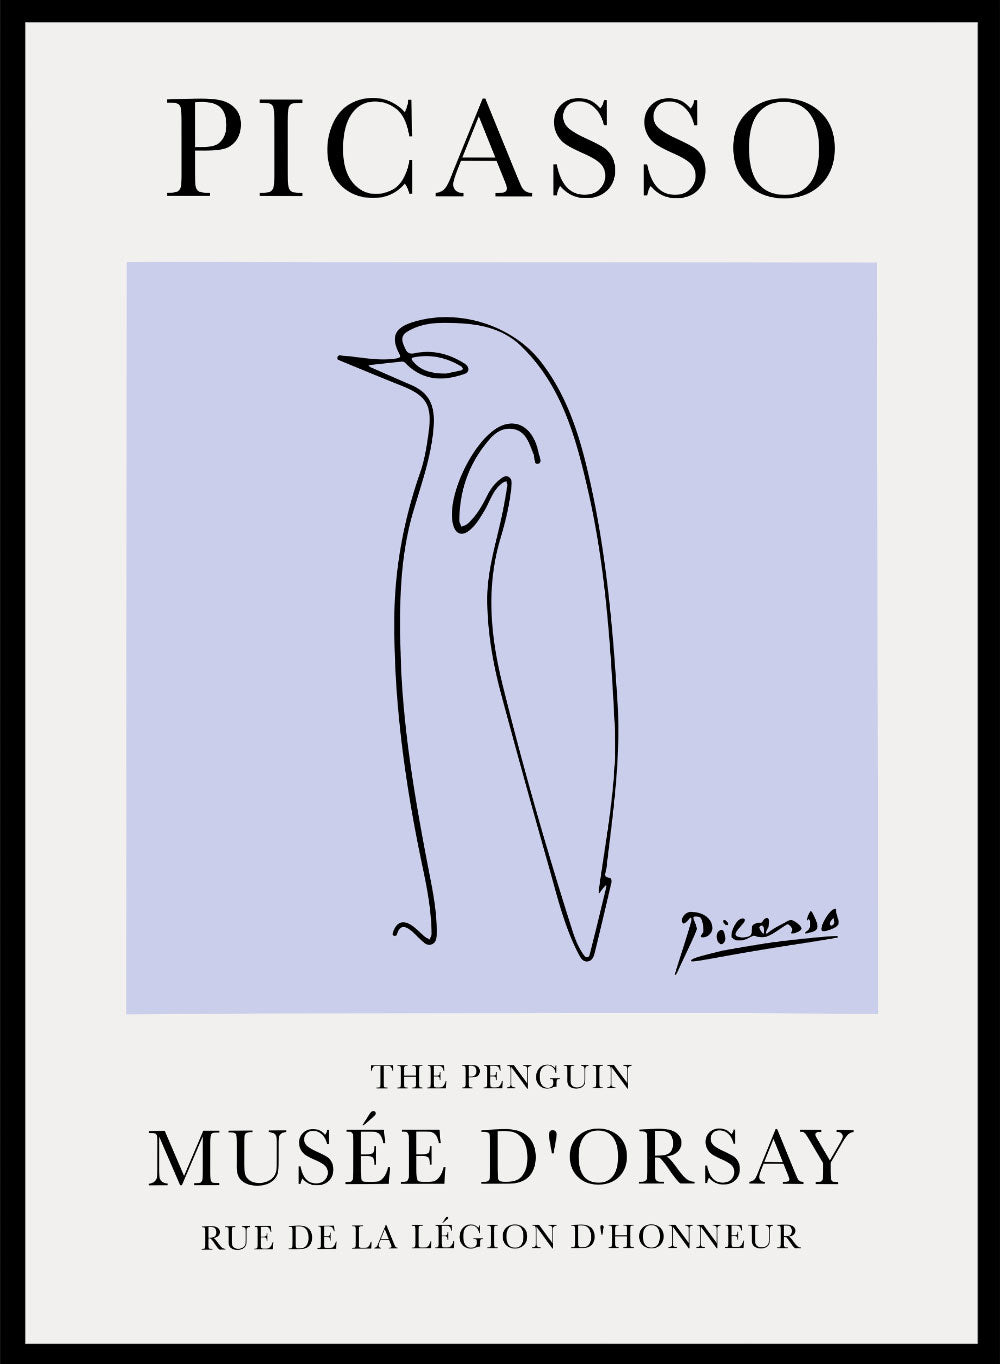 The Penguin Line Drawing by Pablo Picasso Print